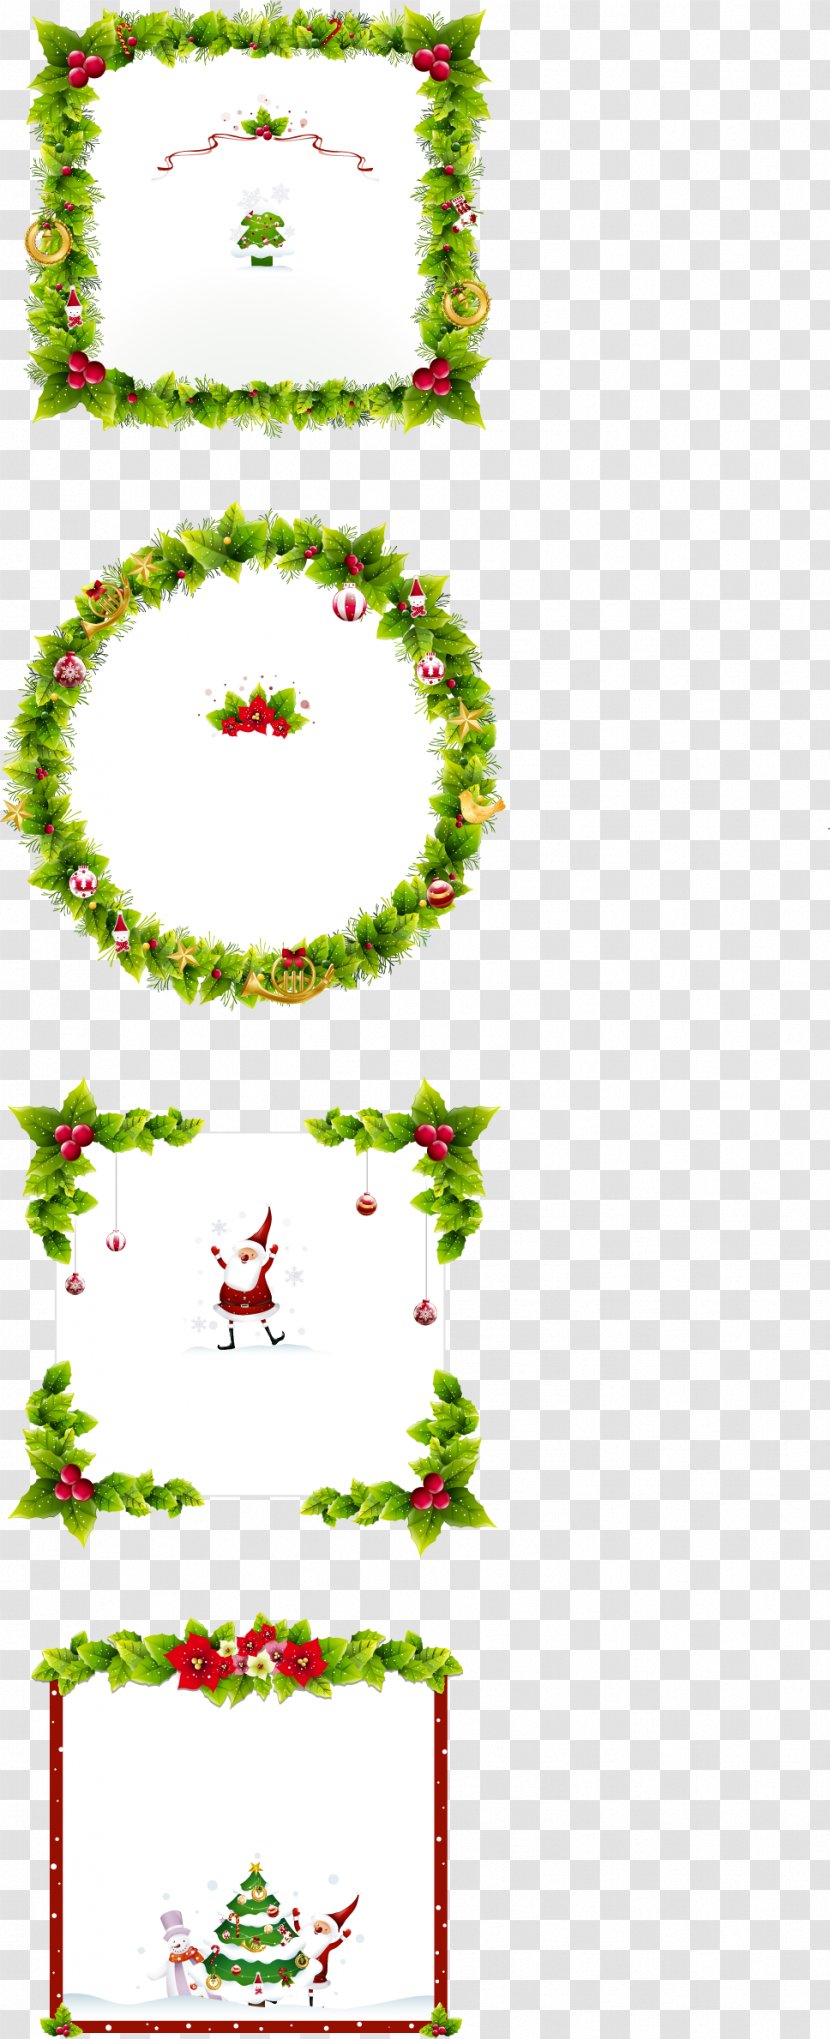 Christmas Ornament Picture Frame Clip Art - Flowering Plant - Borders Free Download Transparent PNG